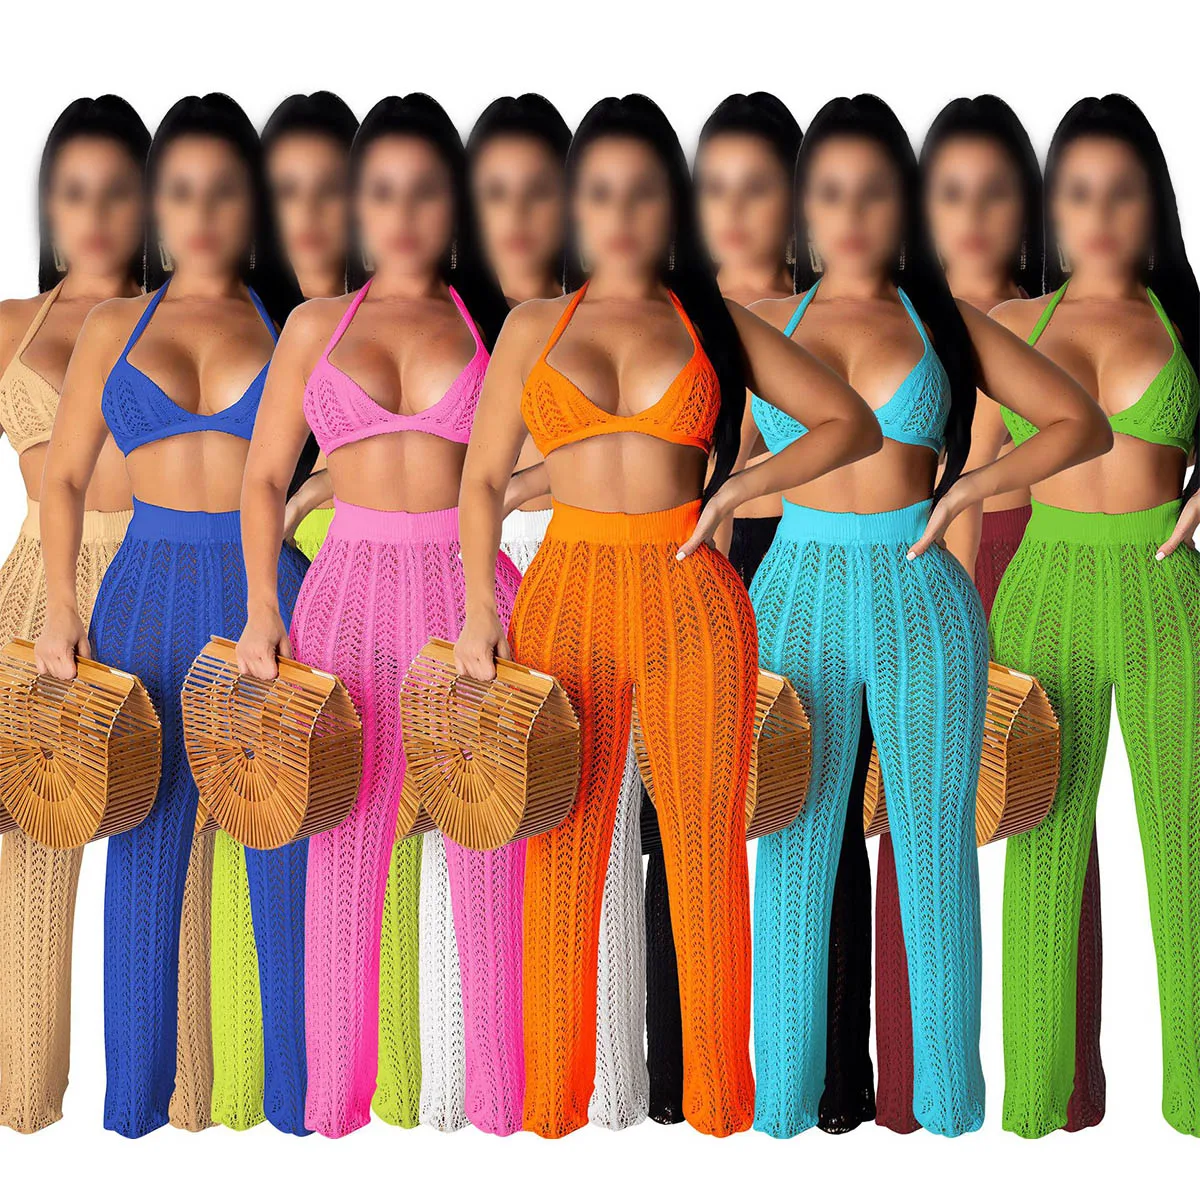 

2022 New Womens Two Piece Pants Halter Cut Out Crochet Beach Cover Up High Waist Swimsuits With Trunks To Match, Customized color